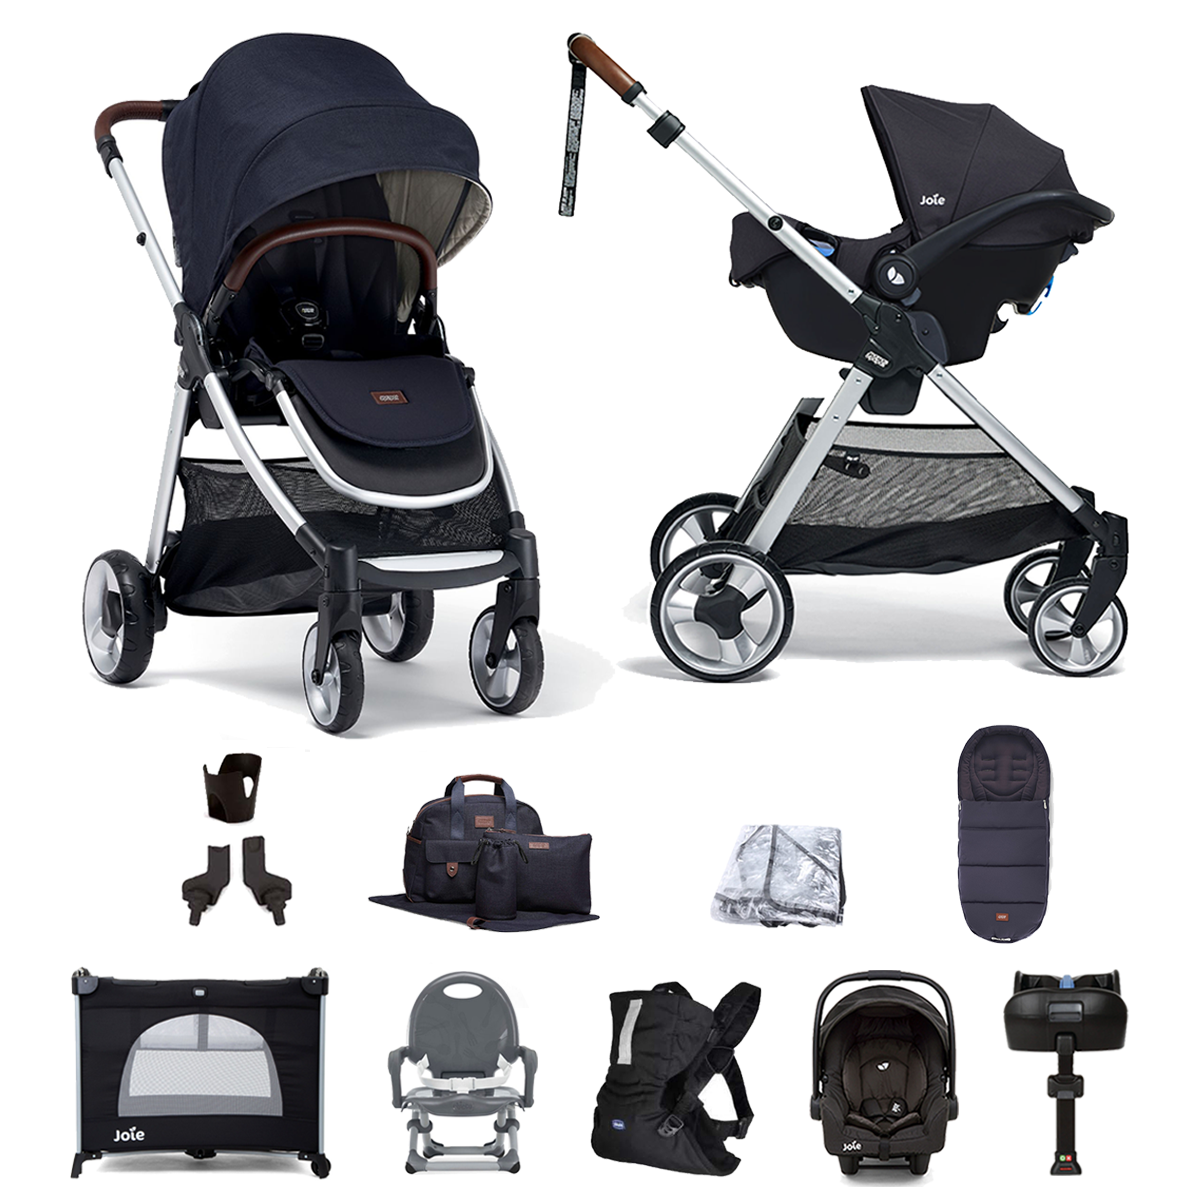 Mamas & Papas Flip XT2 11pc Essentials (Gemm Car Seat) Everything You Need Travel System Bundle with ISOFIX Base  - Navy